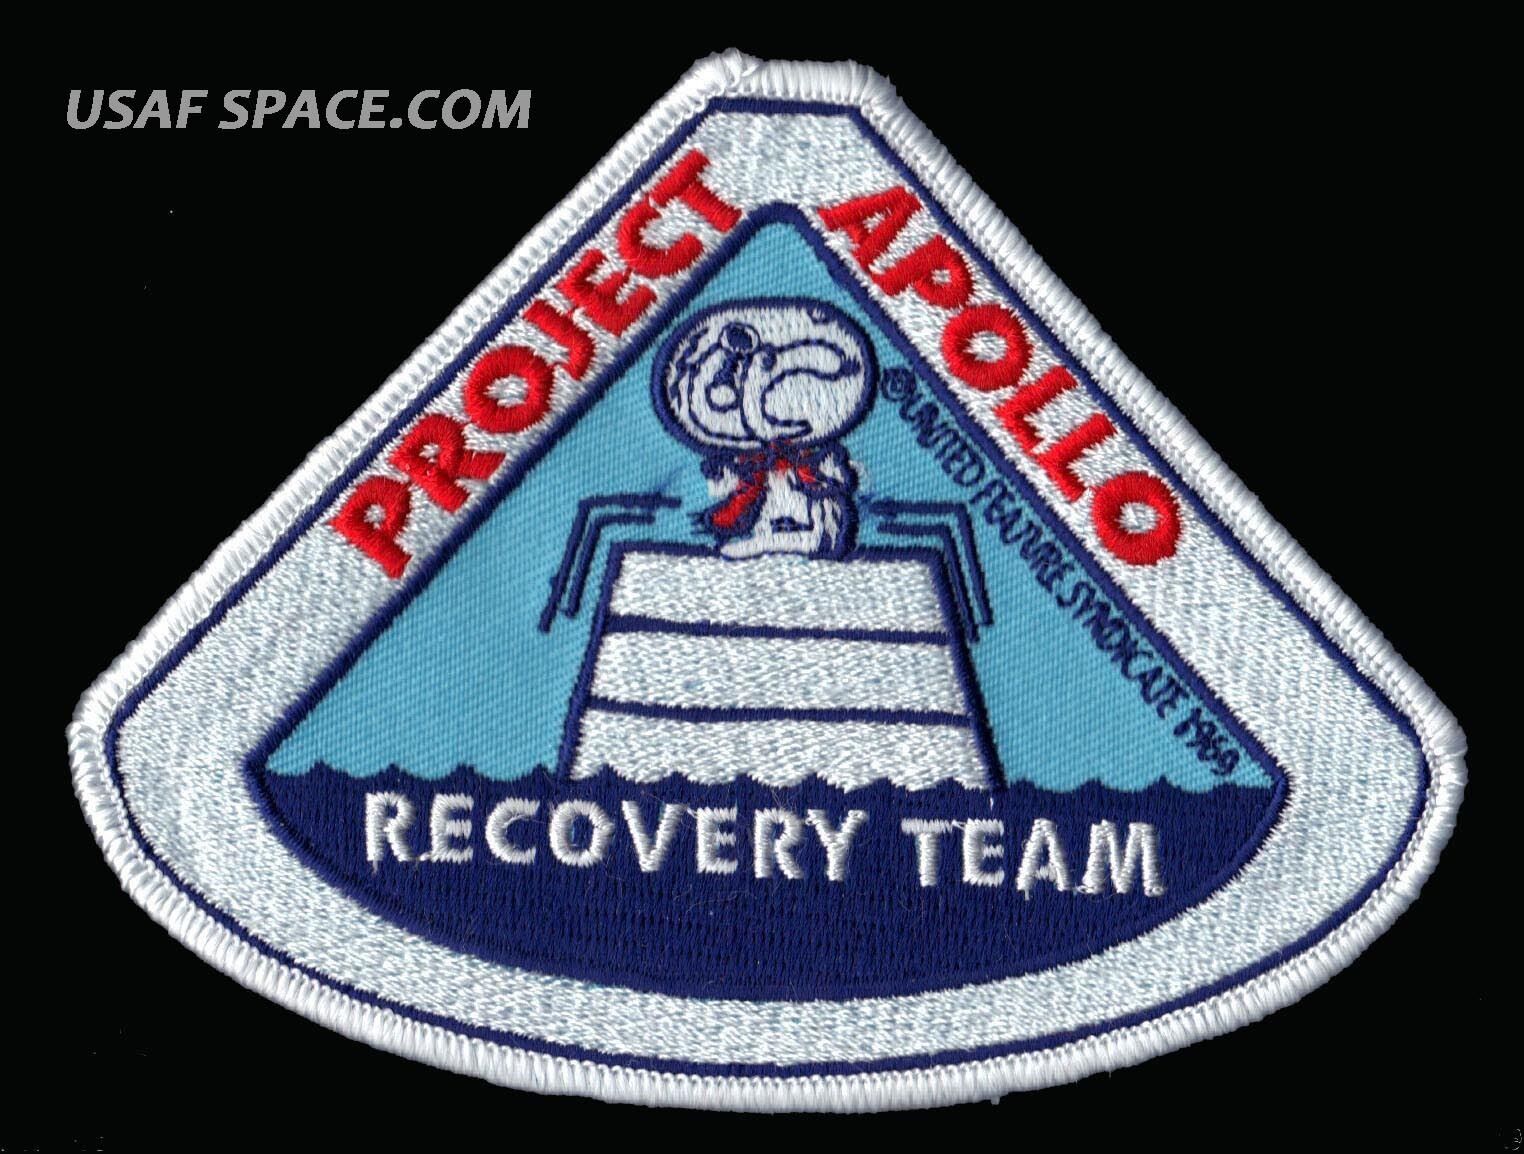 Snoopy - Project Apollo - Recovery Team - Nasa Space Patch - Mint - Condition